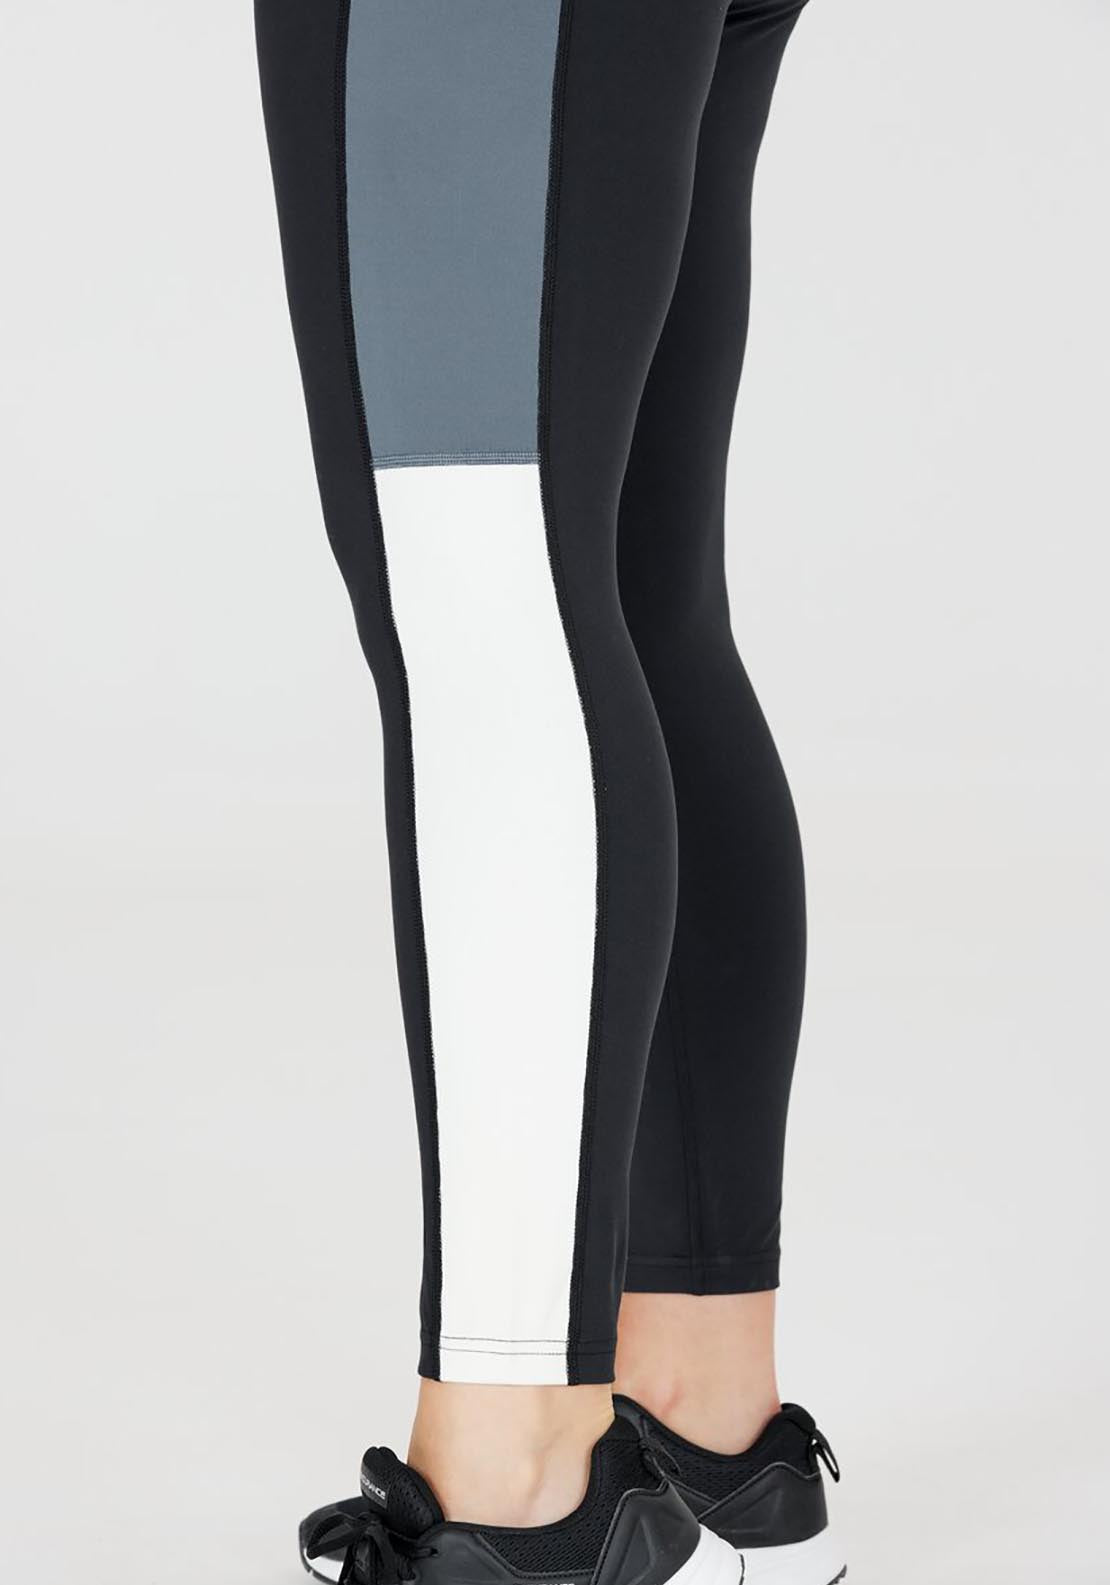 Q Ava Womens Color Block Tights 4 Shaws Department Stores